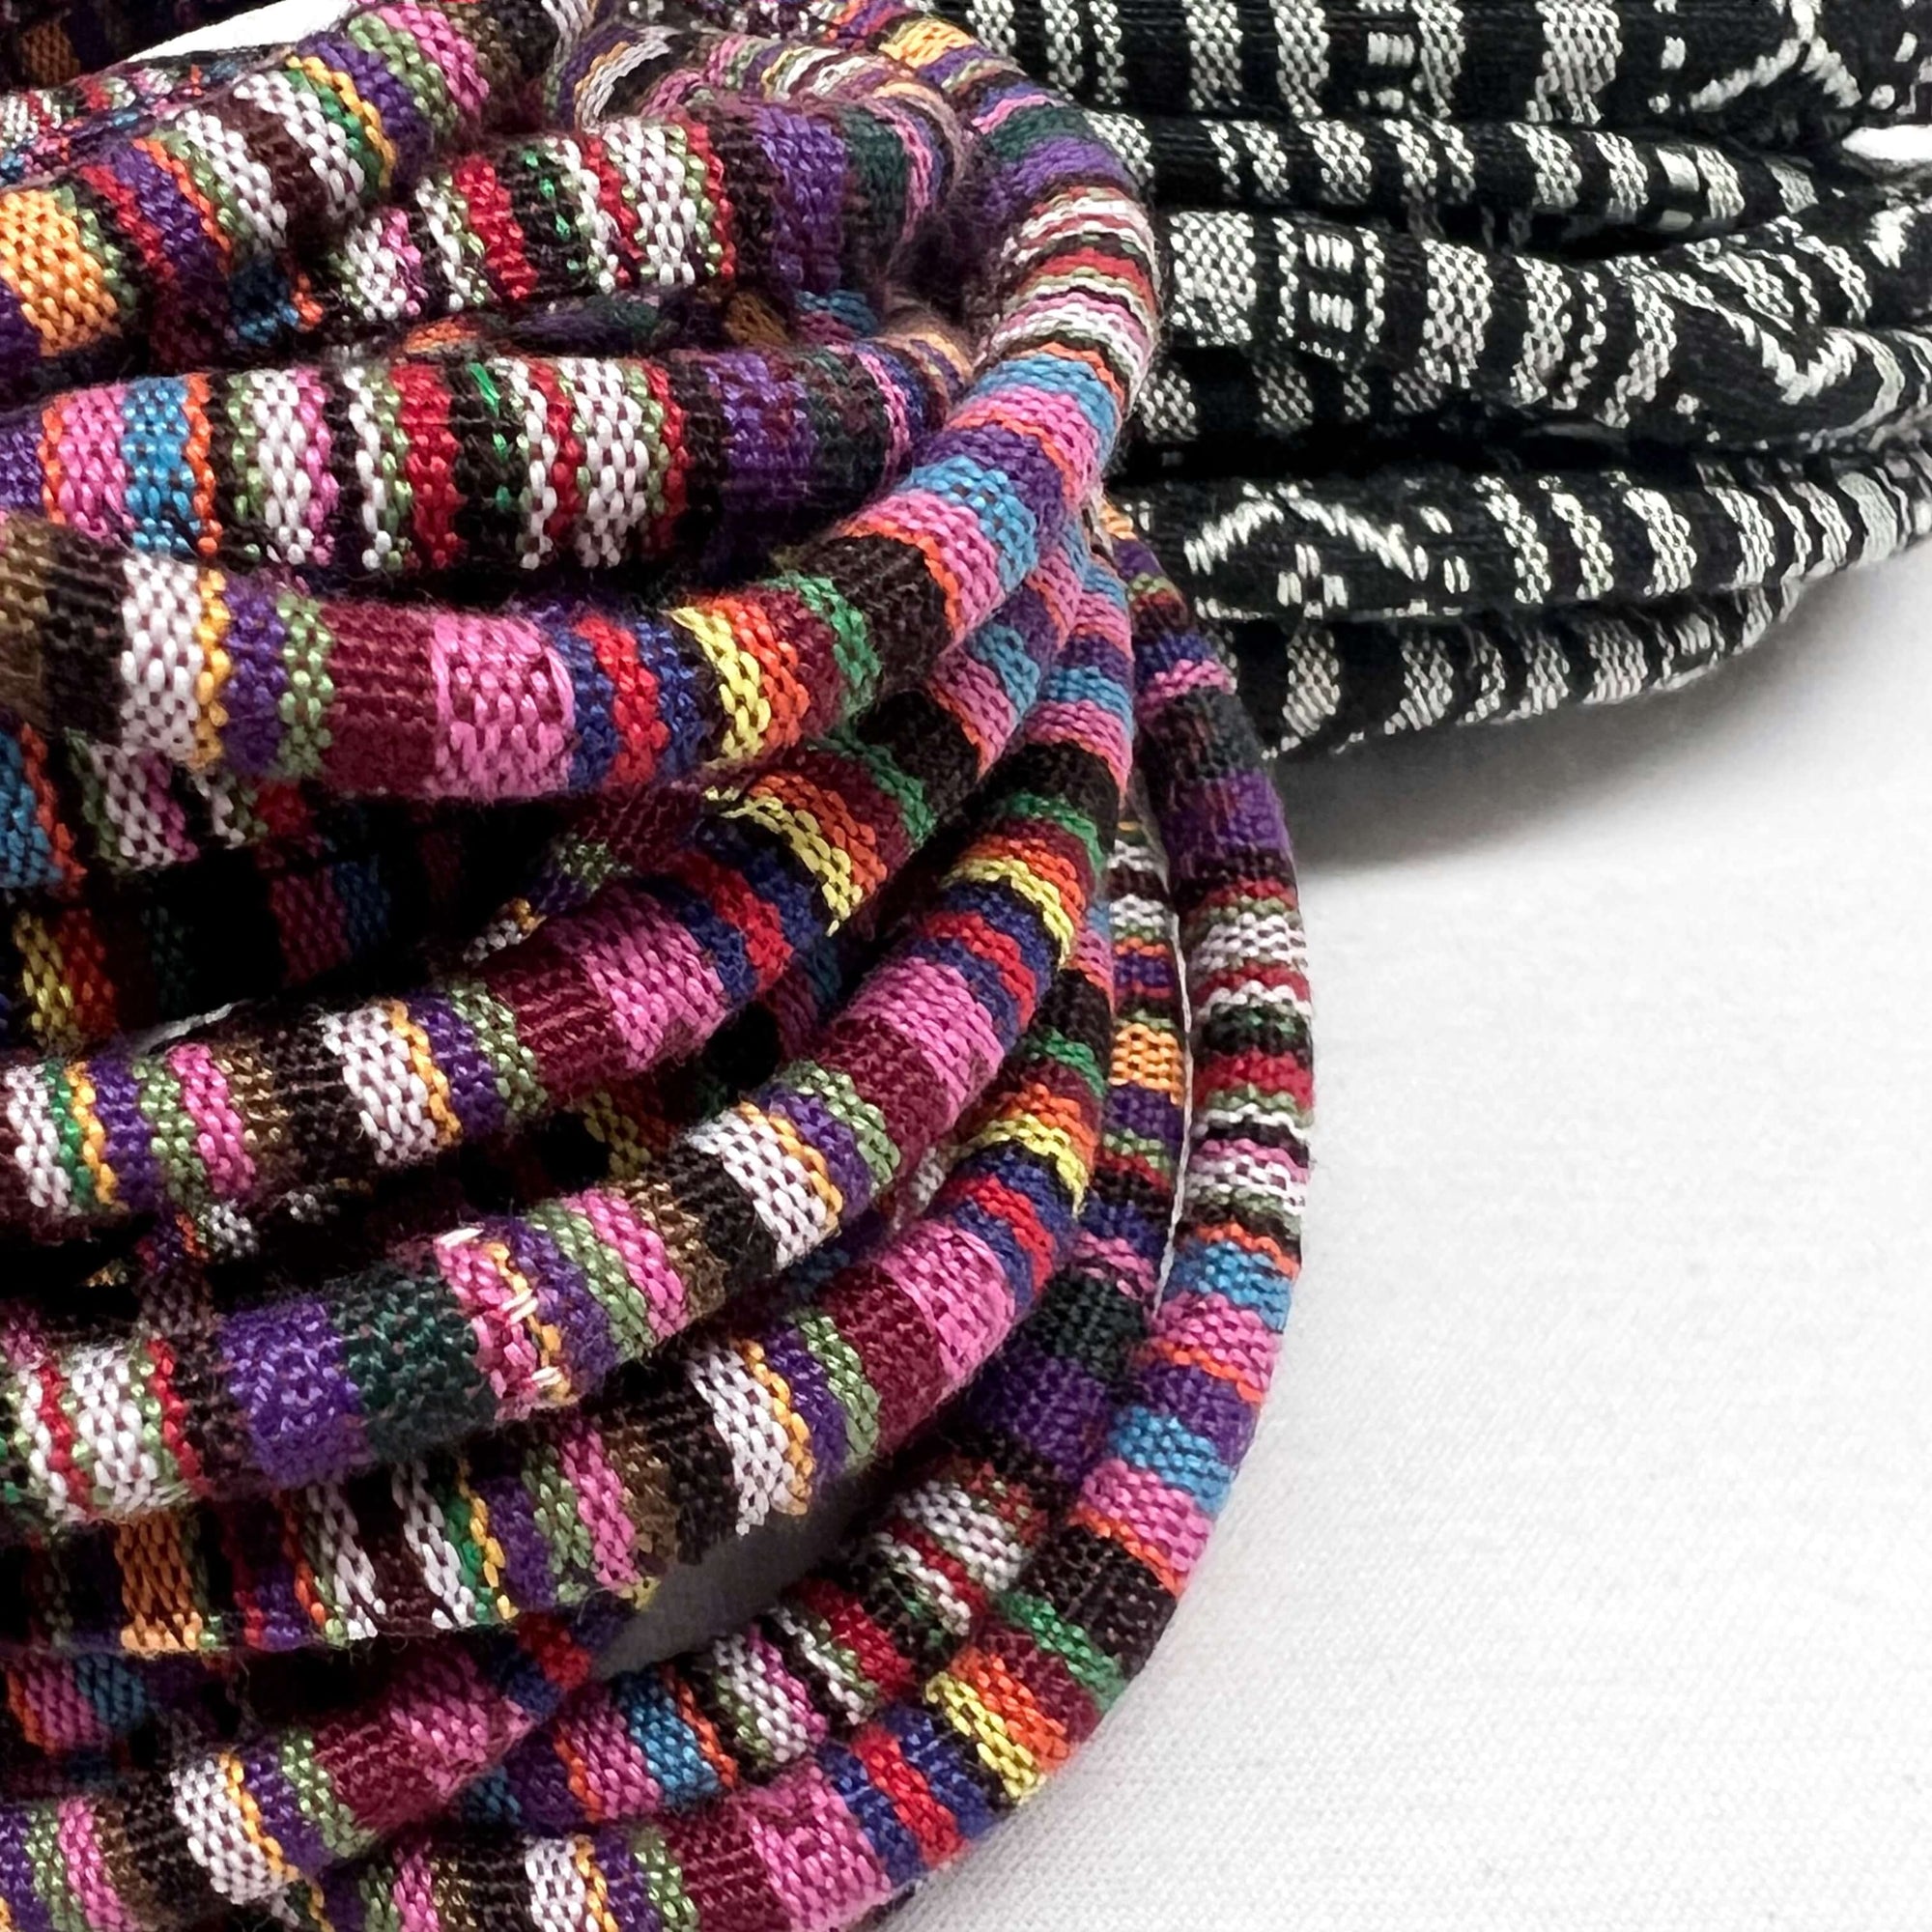 up-close view of hand loomed woven cord showing colour and intricate details of designs